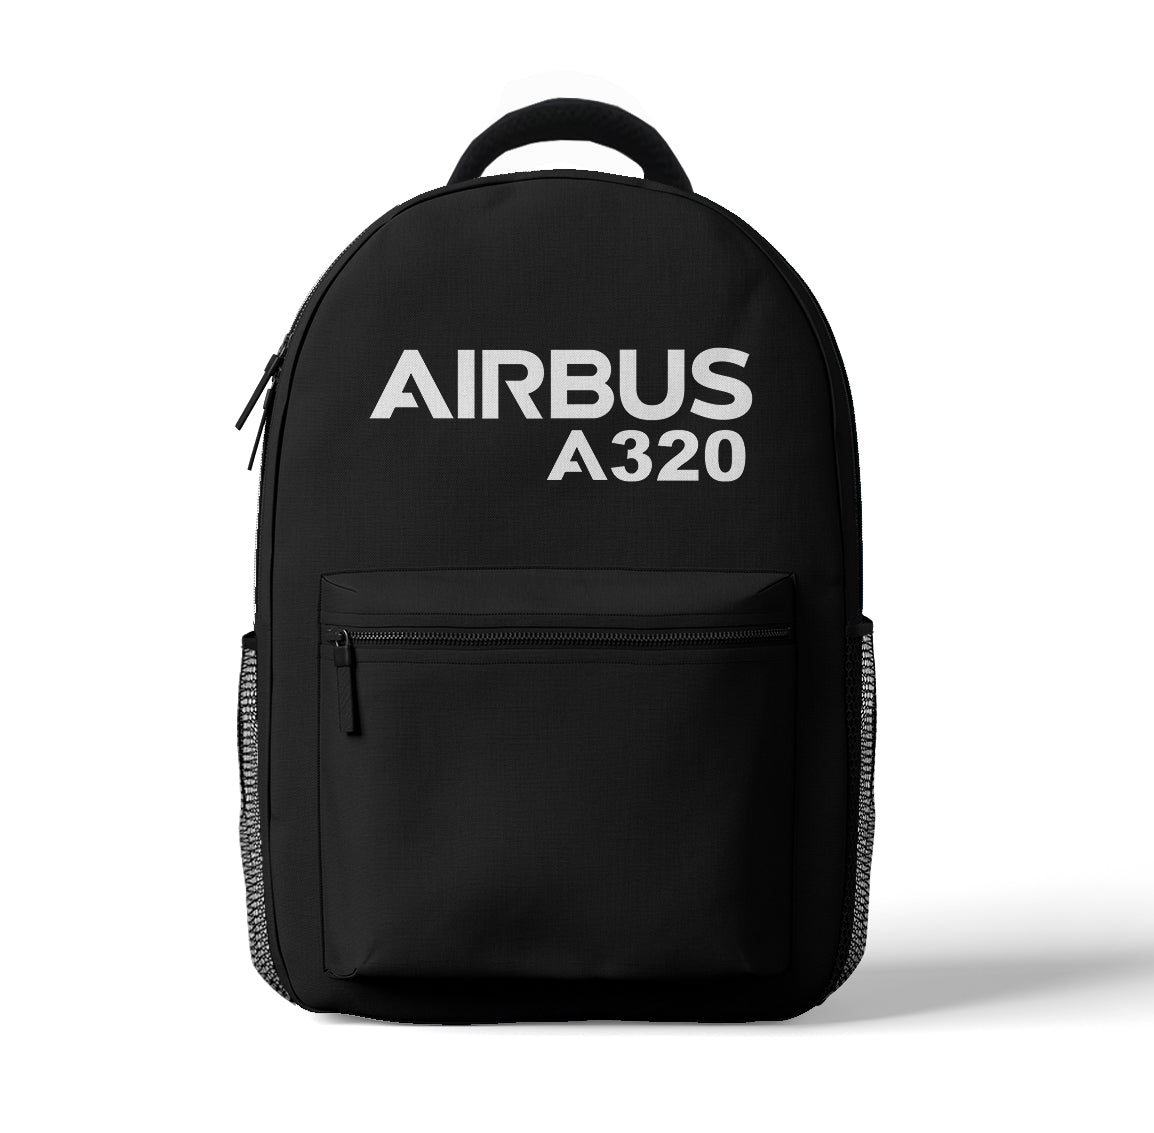 Airbus A320 & Text Designed 3D Backpacks